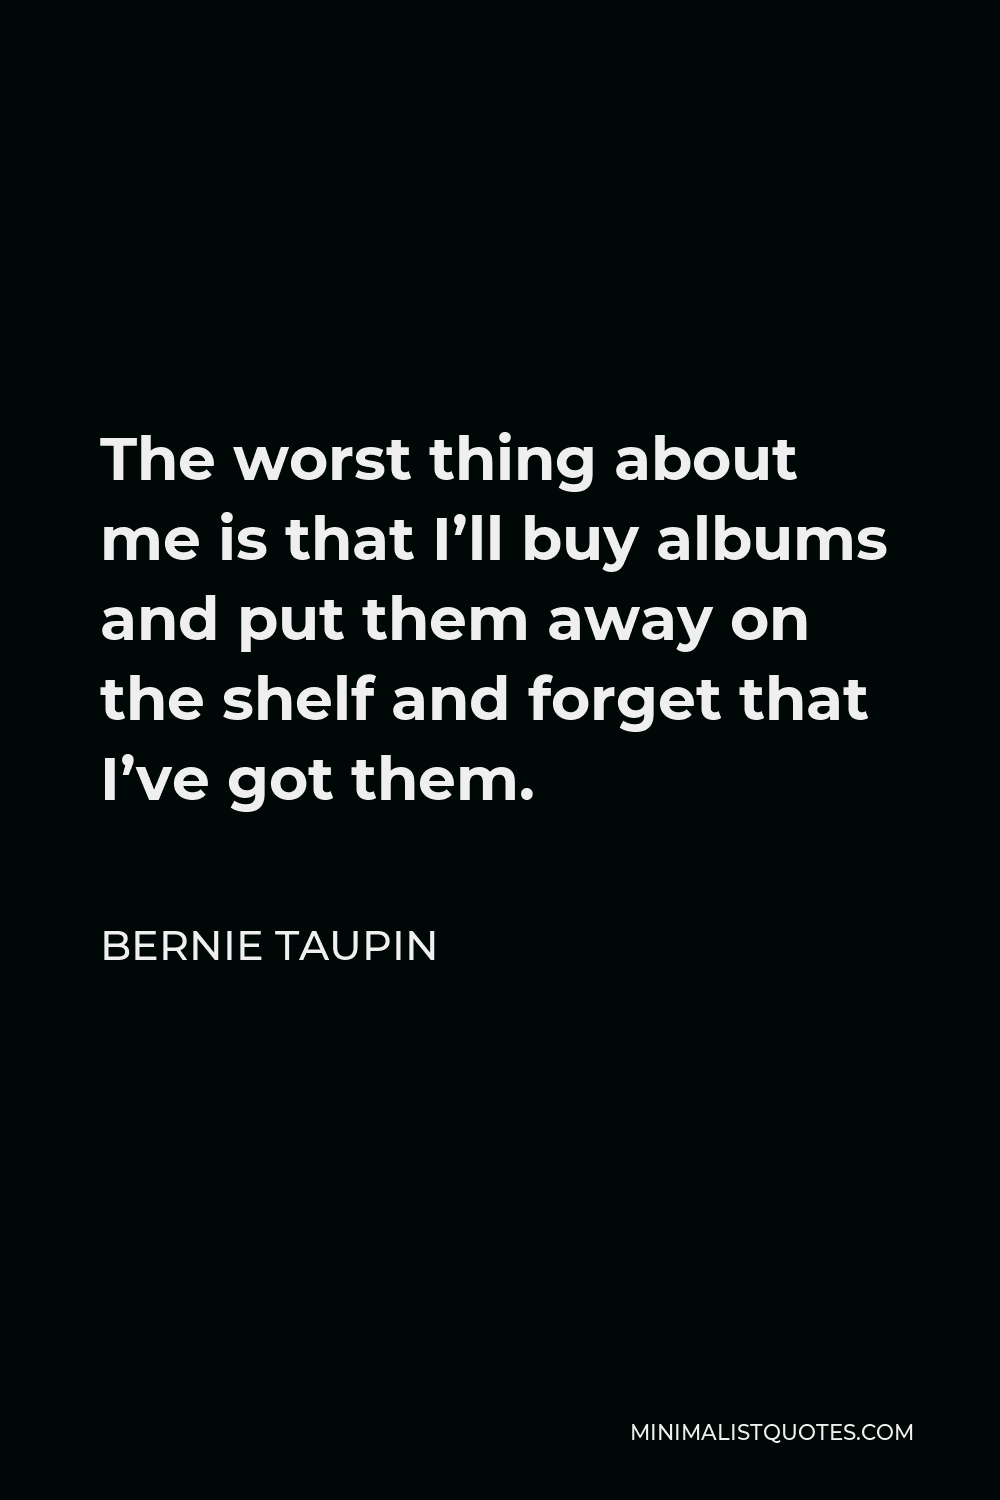 Bernie Taupin Quote - The worst thing about me is that I’ll buy albums and put them away on the shelf and forget that I’ve got them.